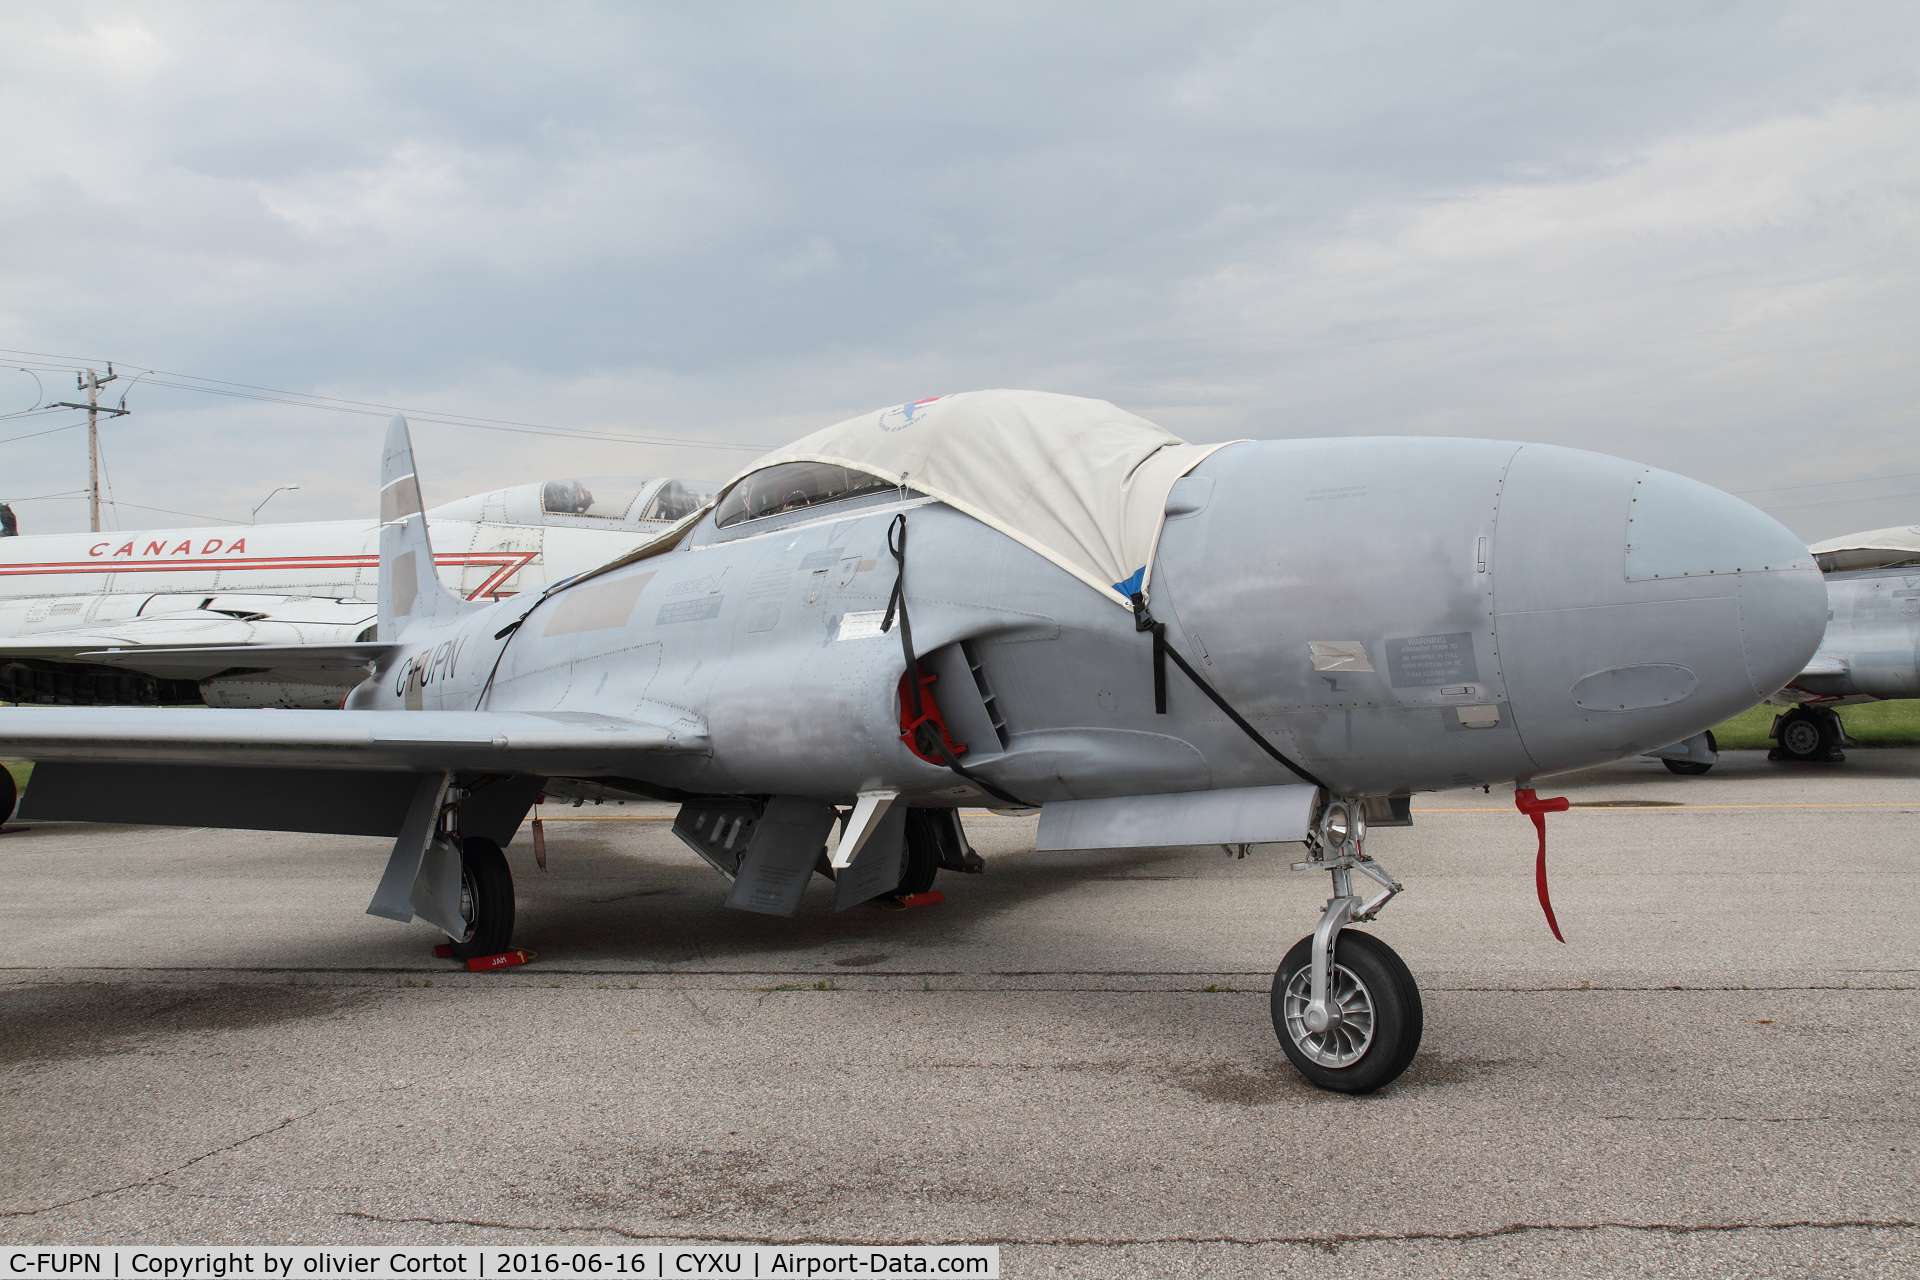 C-FUPN, 1954 Canadair CT-133 Silver Star 3 C/N T33-441, front view